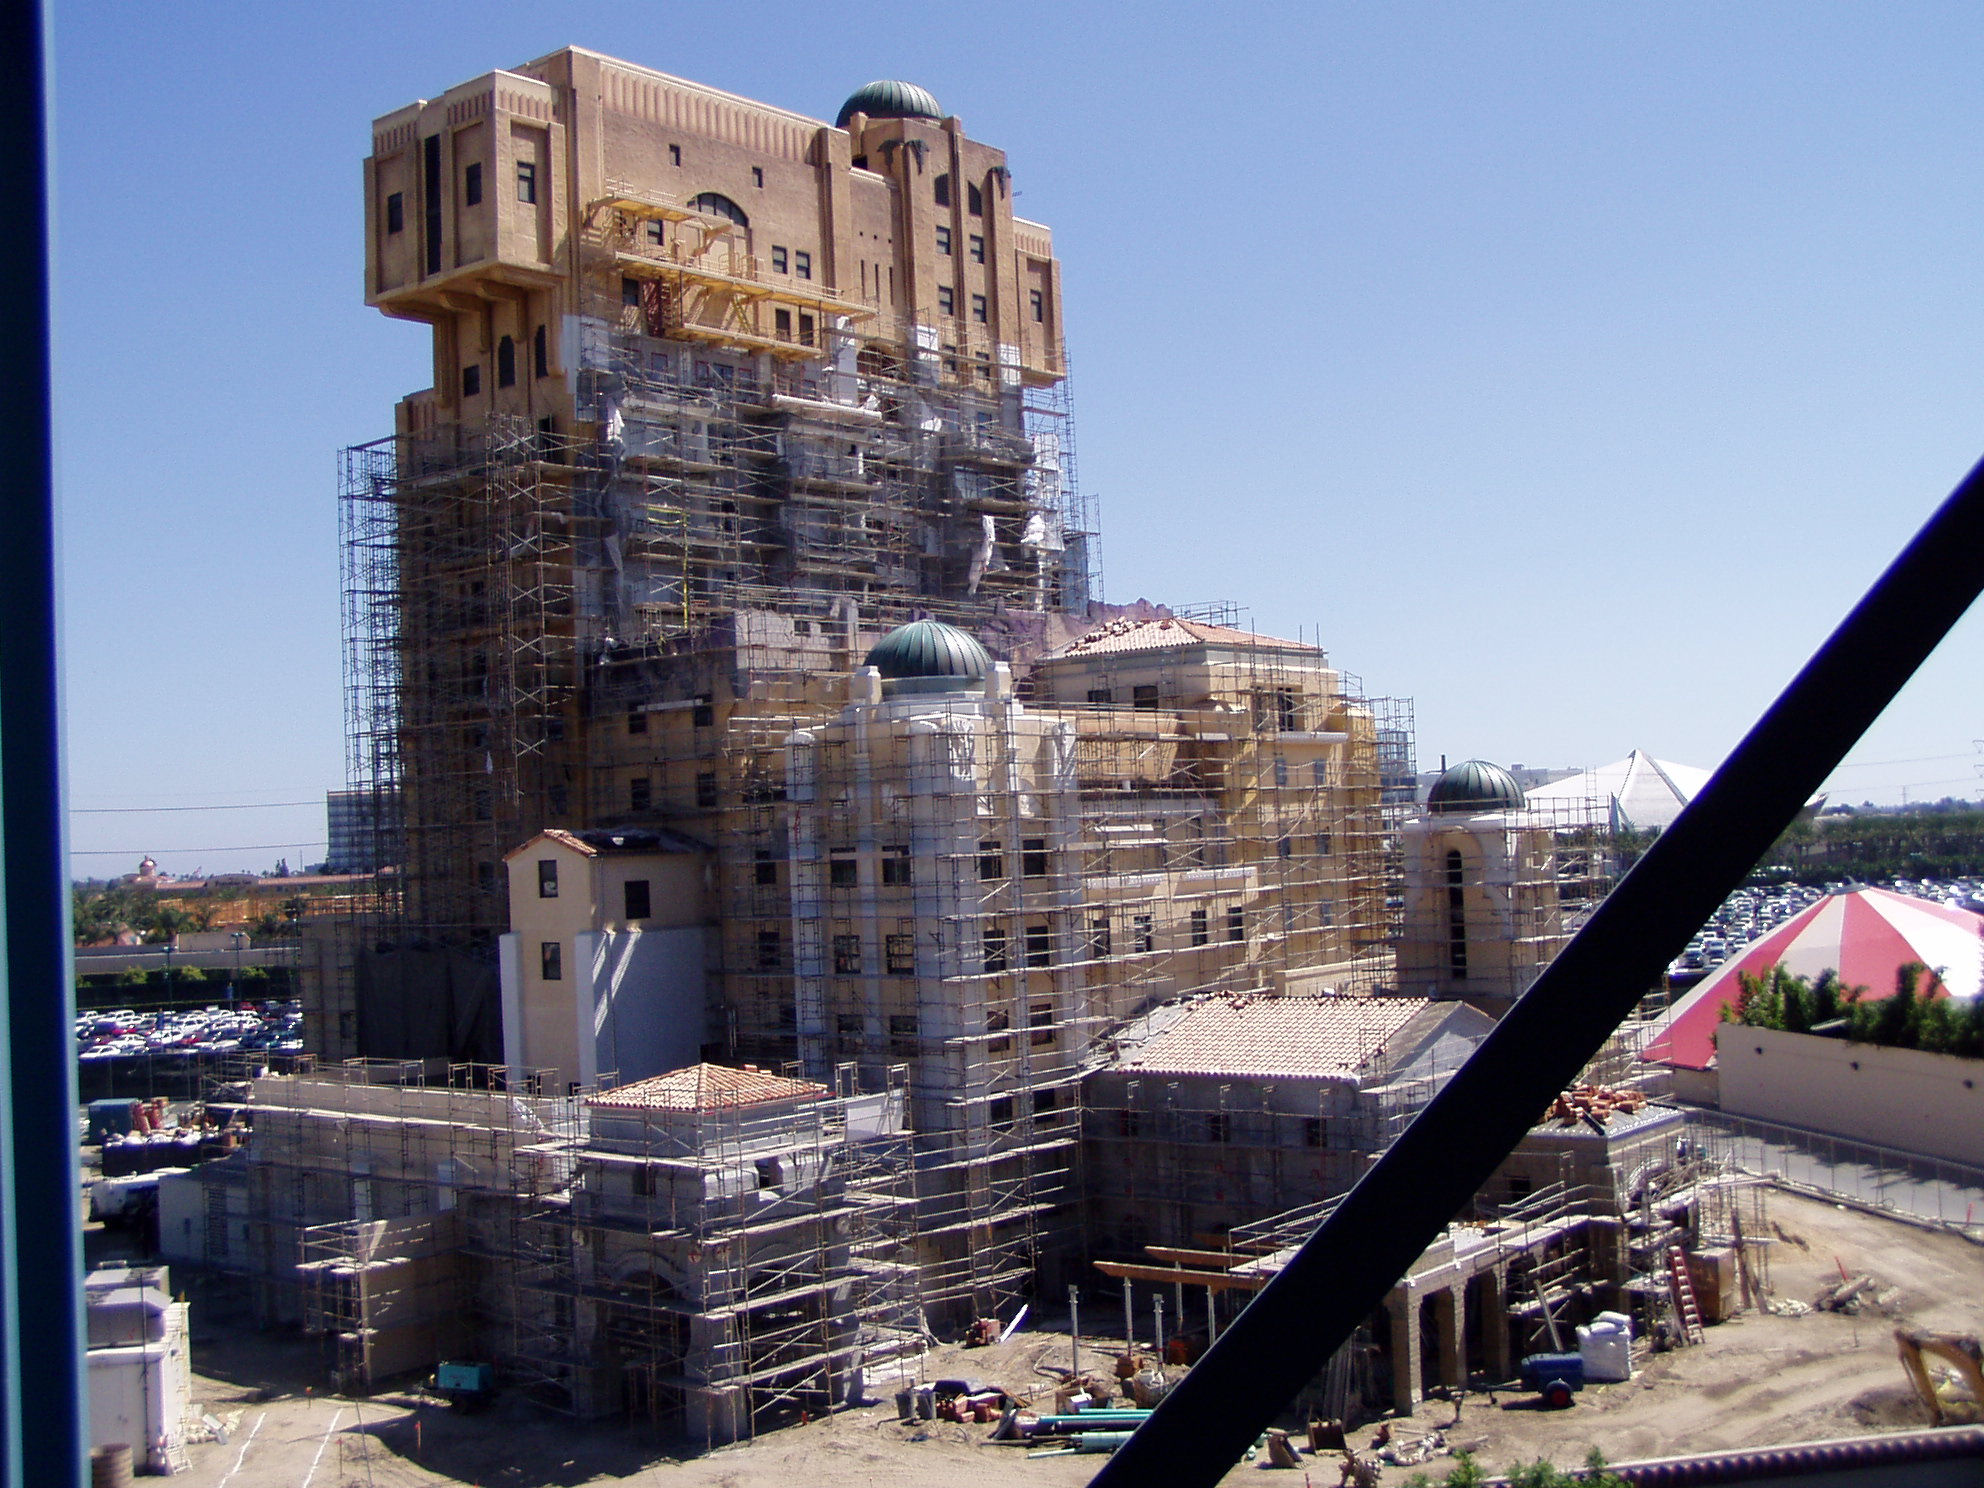 The under construction Tower of Terror at Disney's California Adventure.